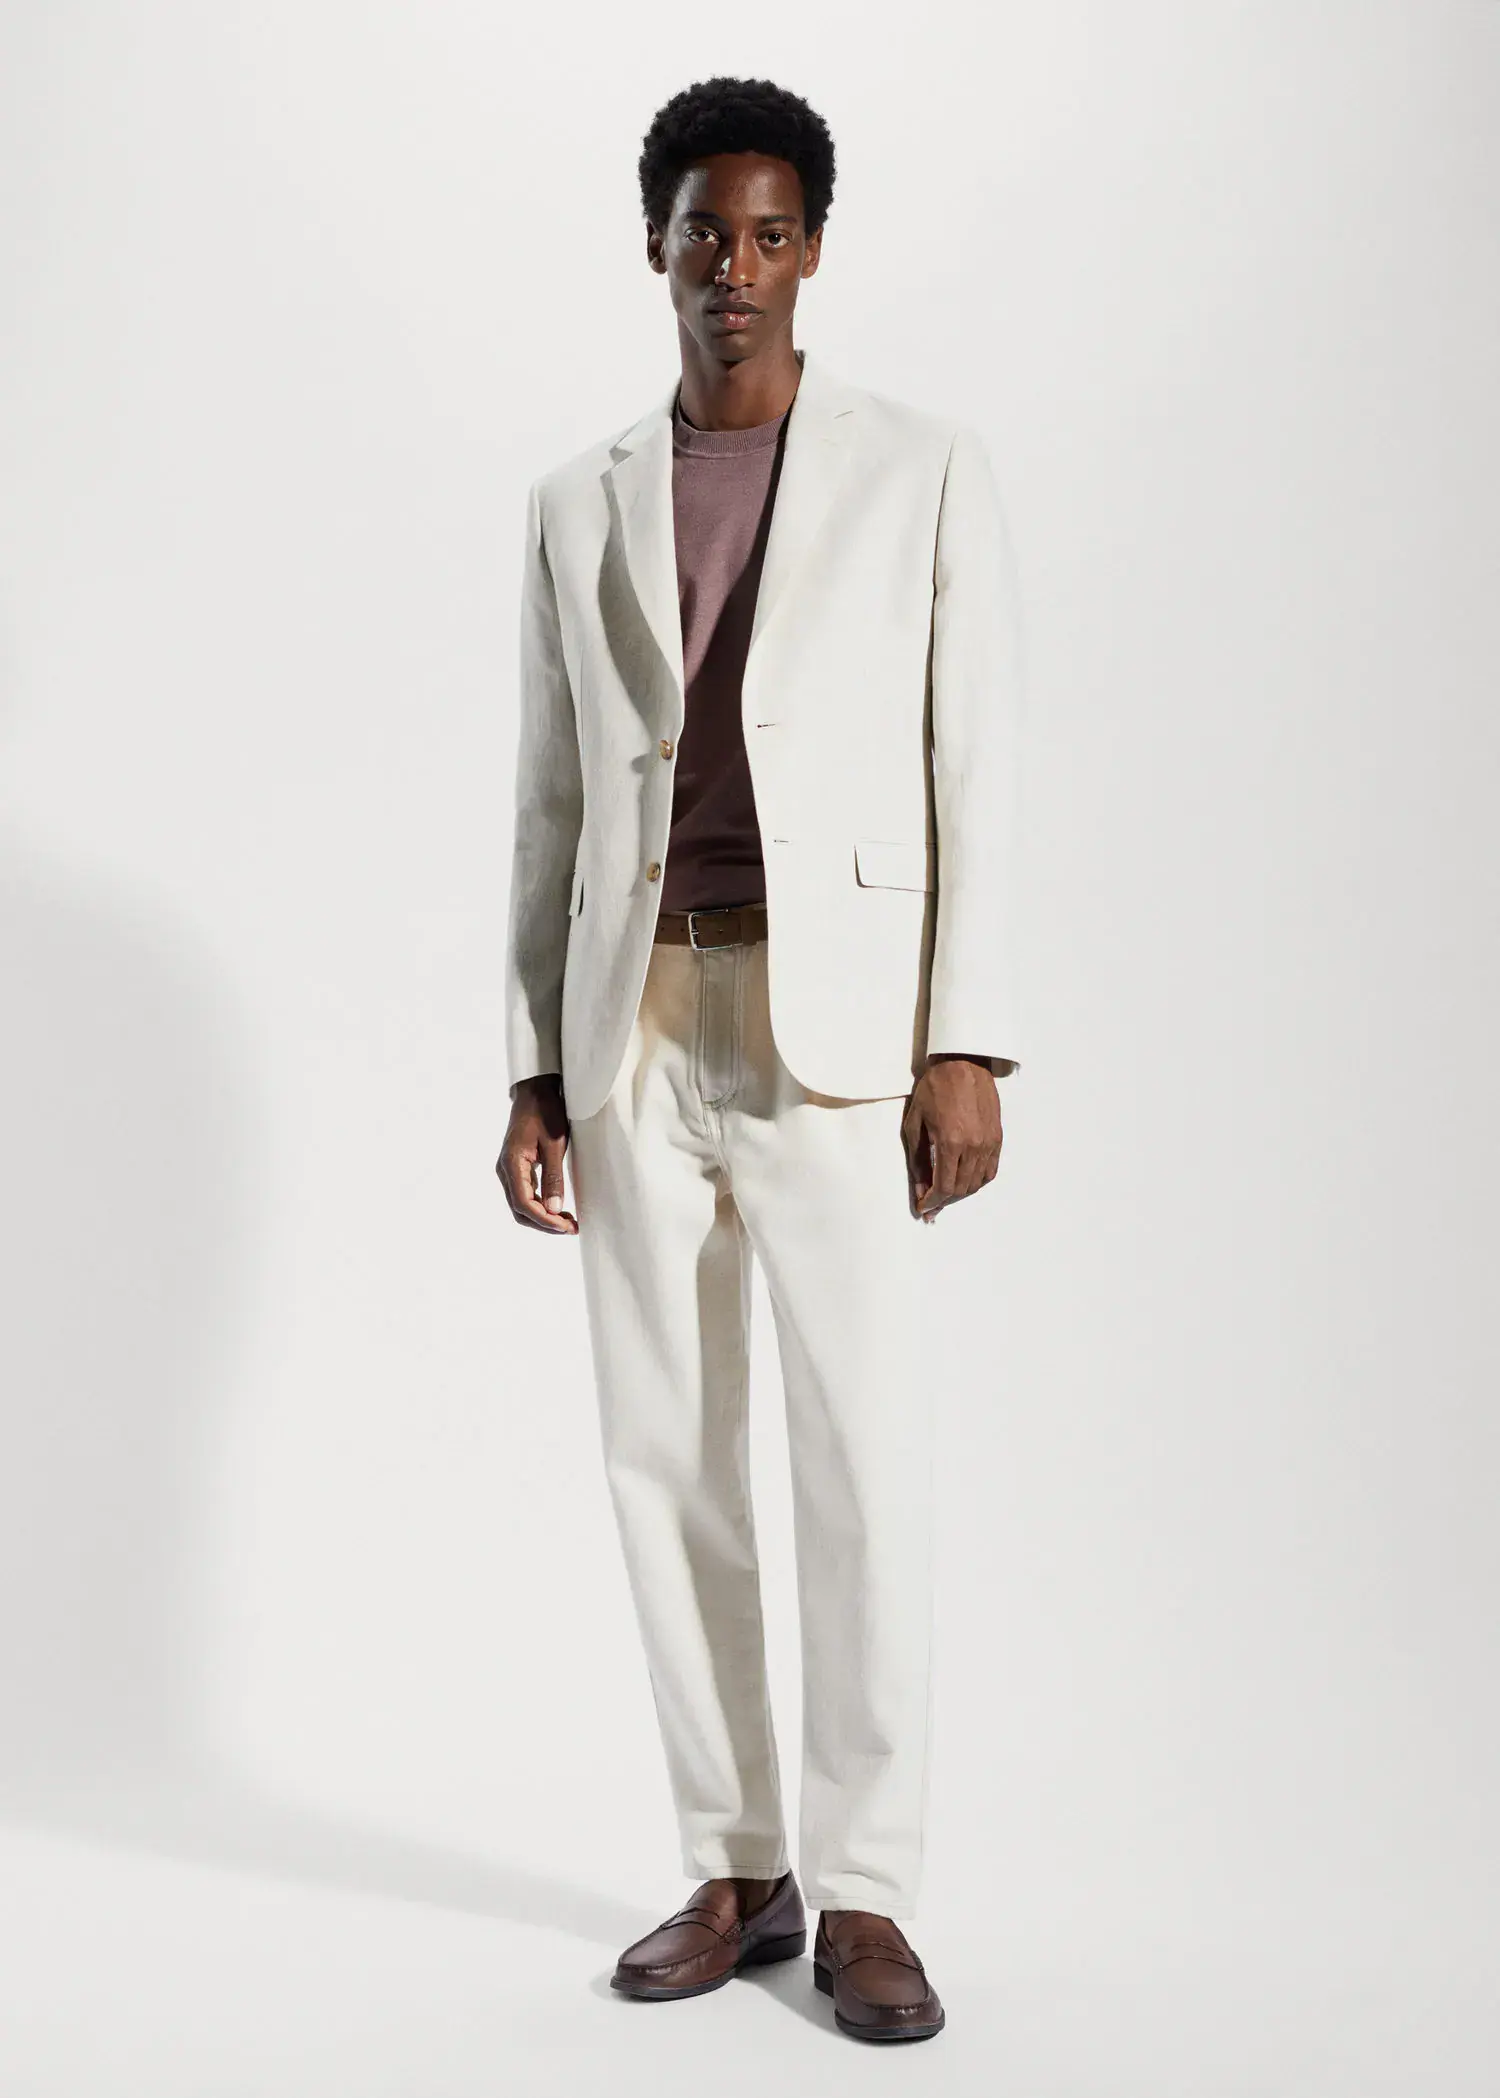 Mango 100% linen slim fit blazer. a man in a white suit standing in front of a white wall. 